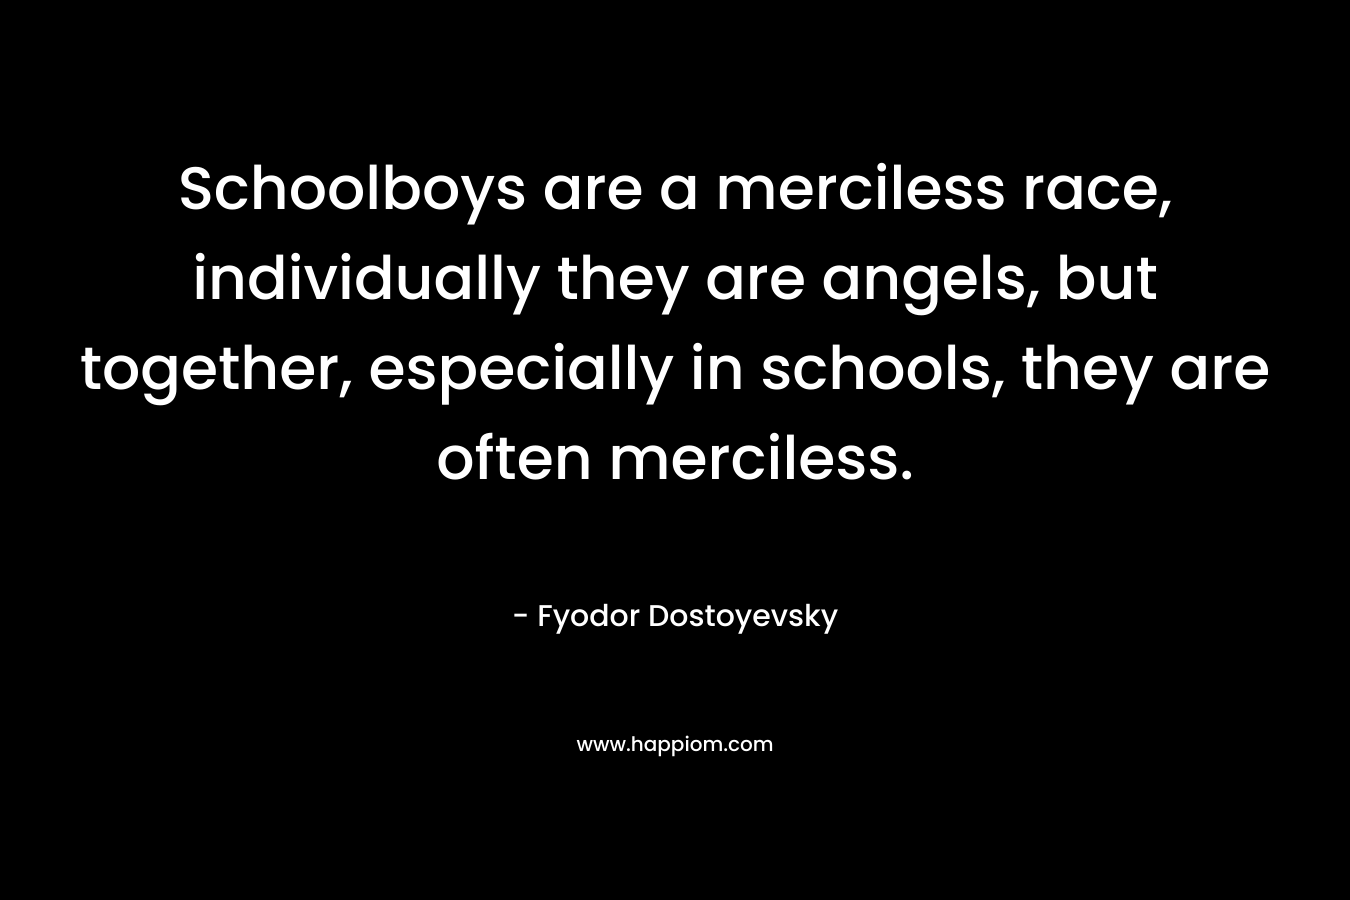 Schoolboys are a merciless race, individually they are angels, but together, especially in schools, they are often merciless.